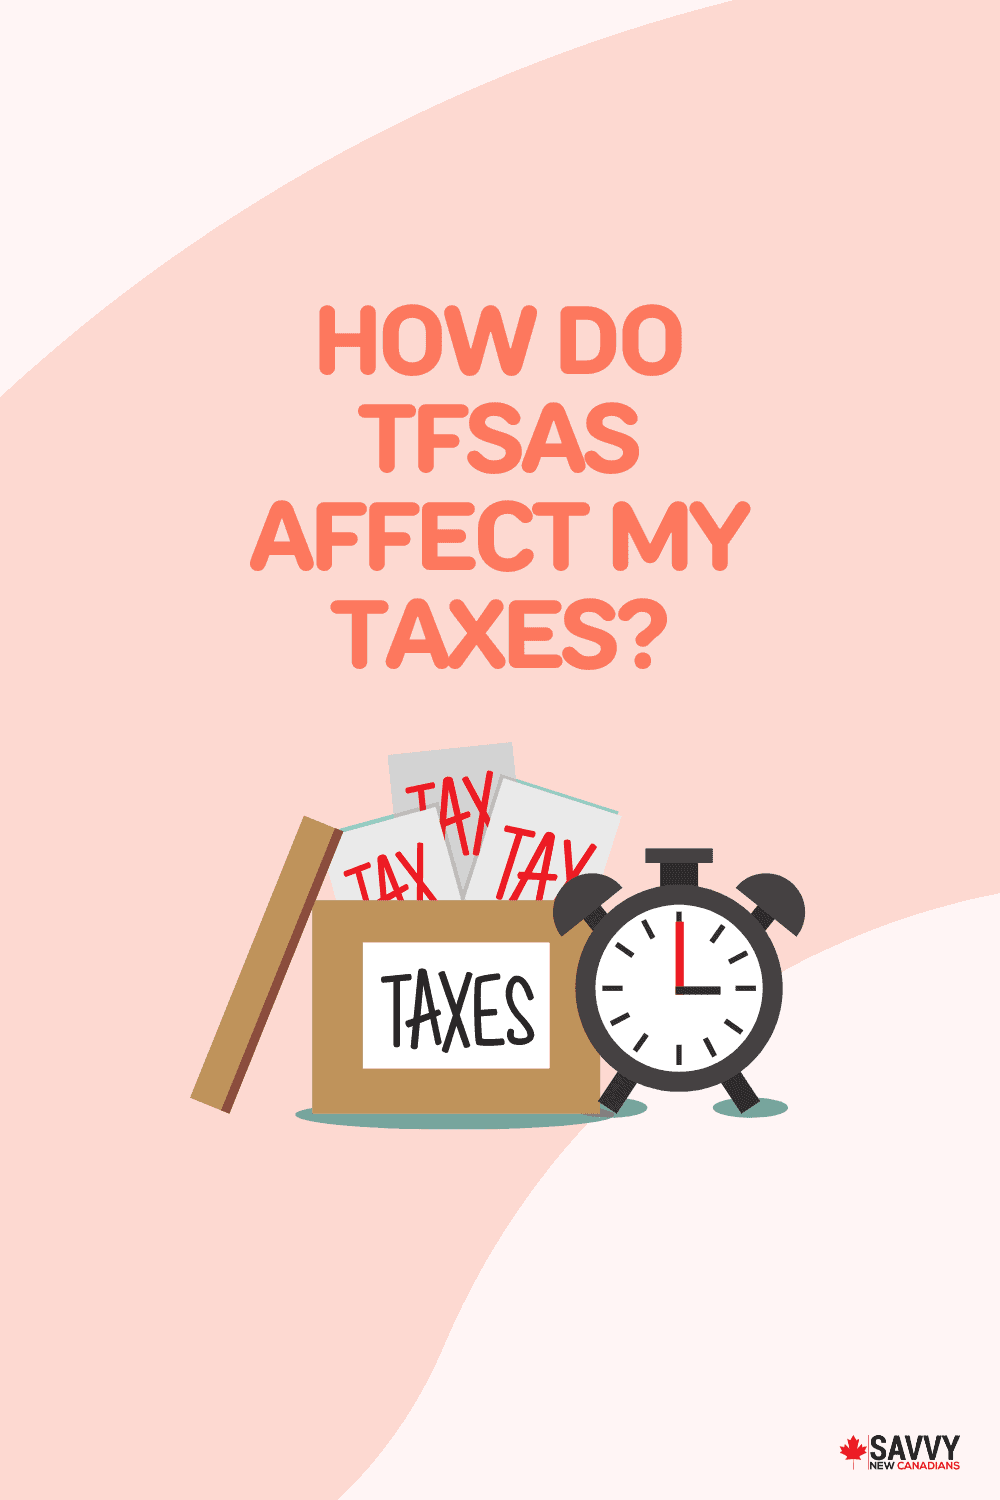 TFSA Taxes: How Do TFSAs Affect My Taxes in 2022?